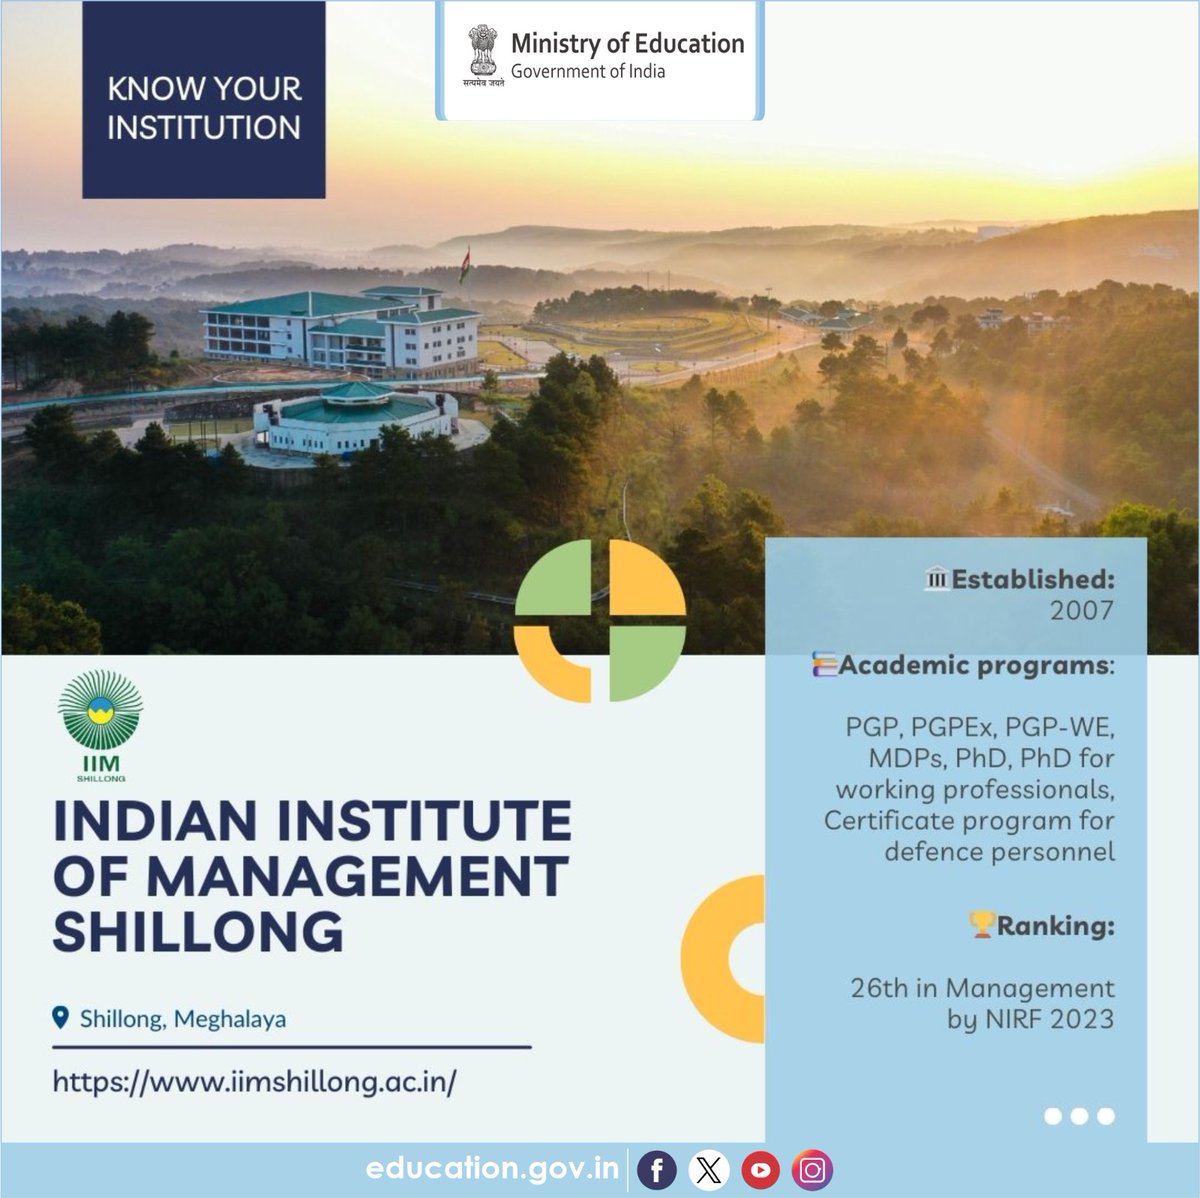 Know about the HEIs of India! Established in 2007, IIM Shillong is actively engaged in transforming the overall management ecosystem through its wide range of academic programmes. It includes PGP, PGPEx, PGP-WE, MDPs, PhD, PhD customized for working professionals, and a